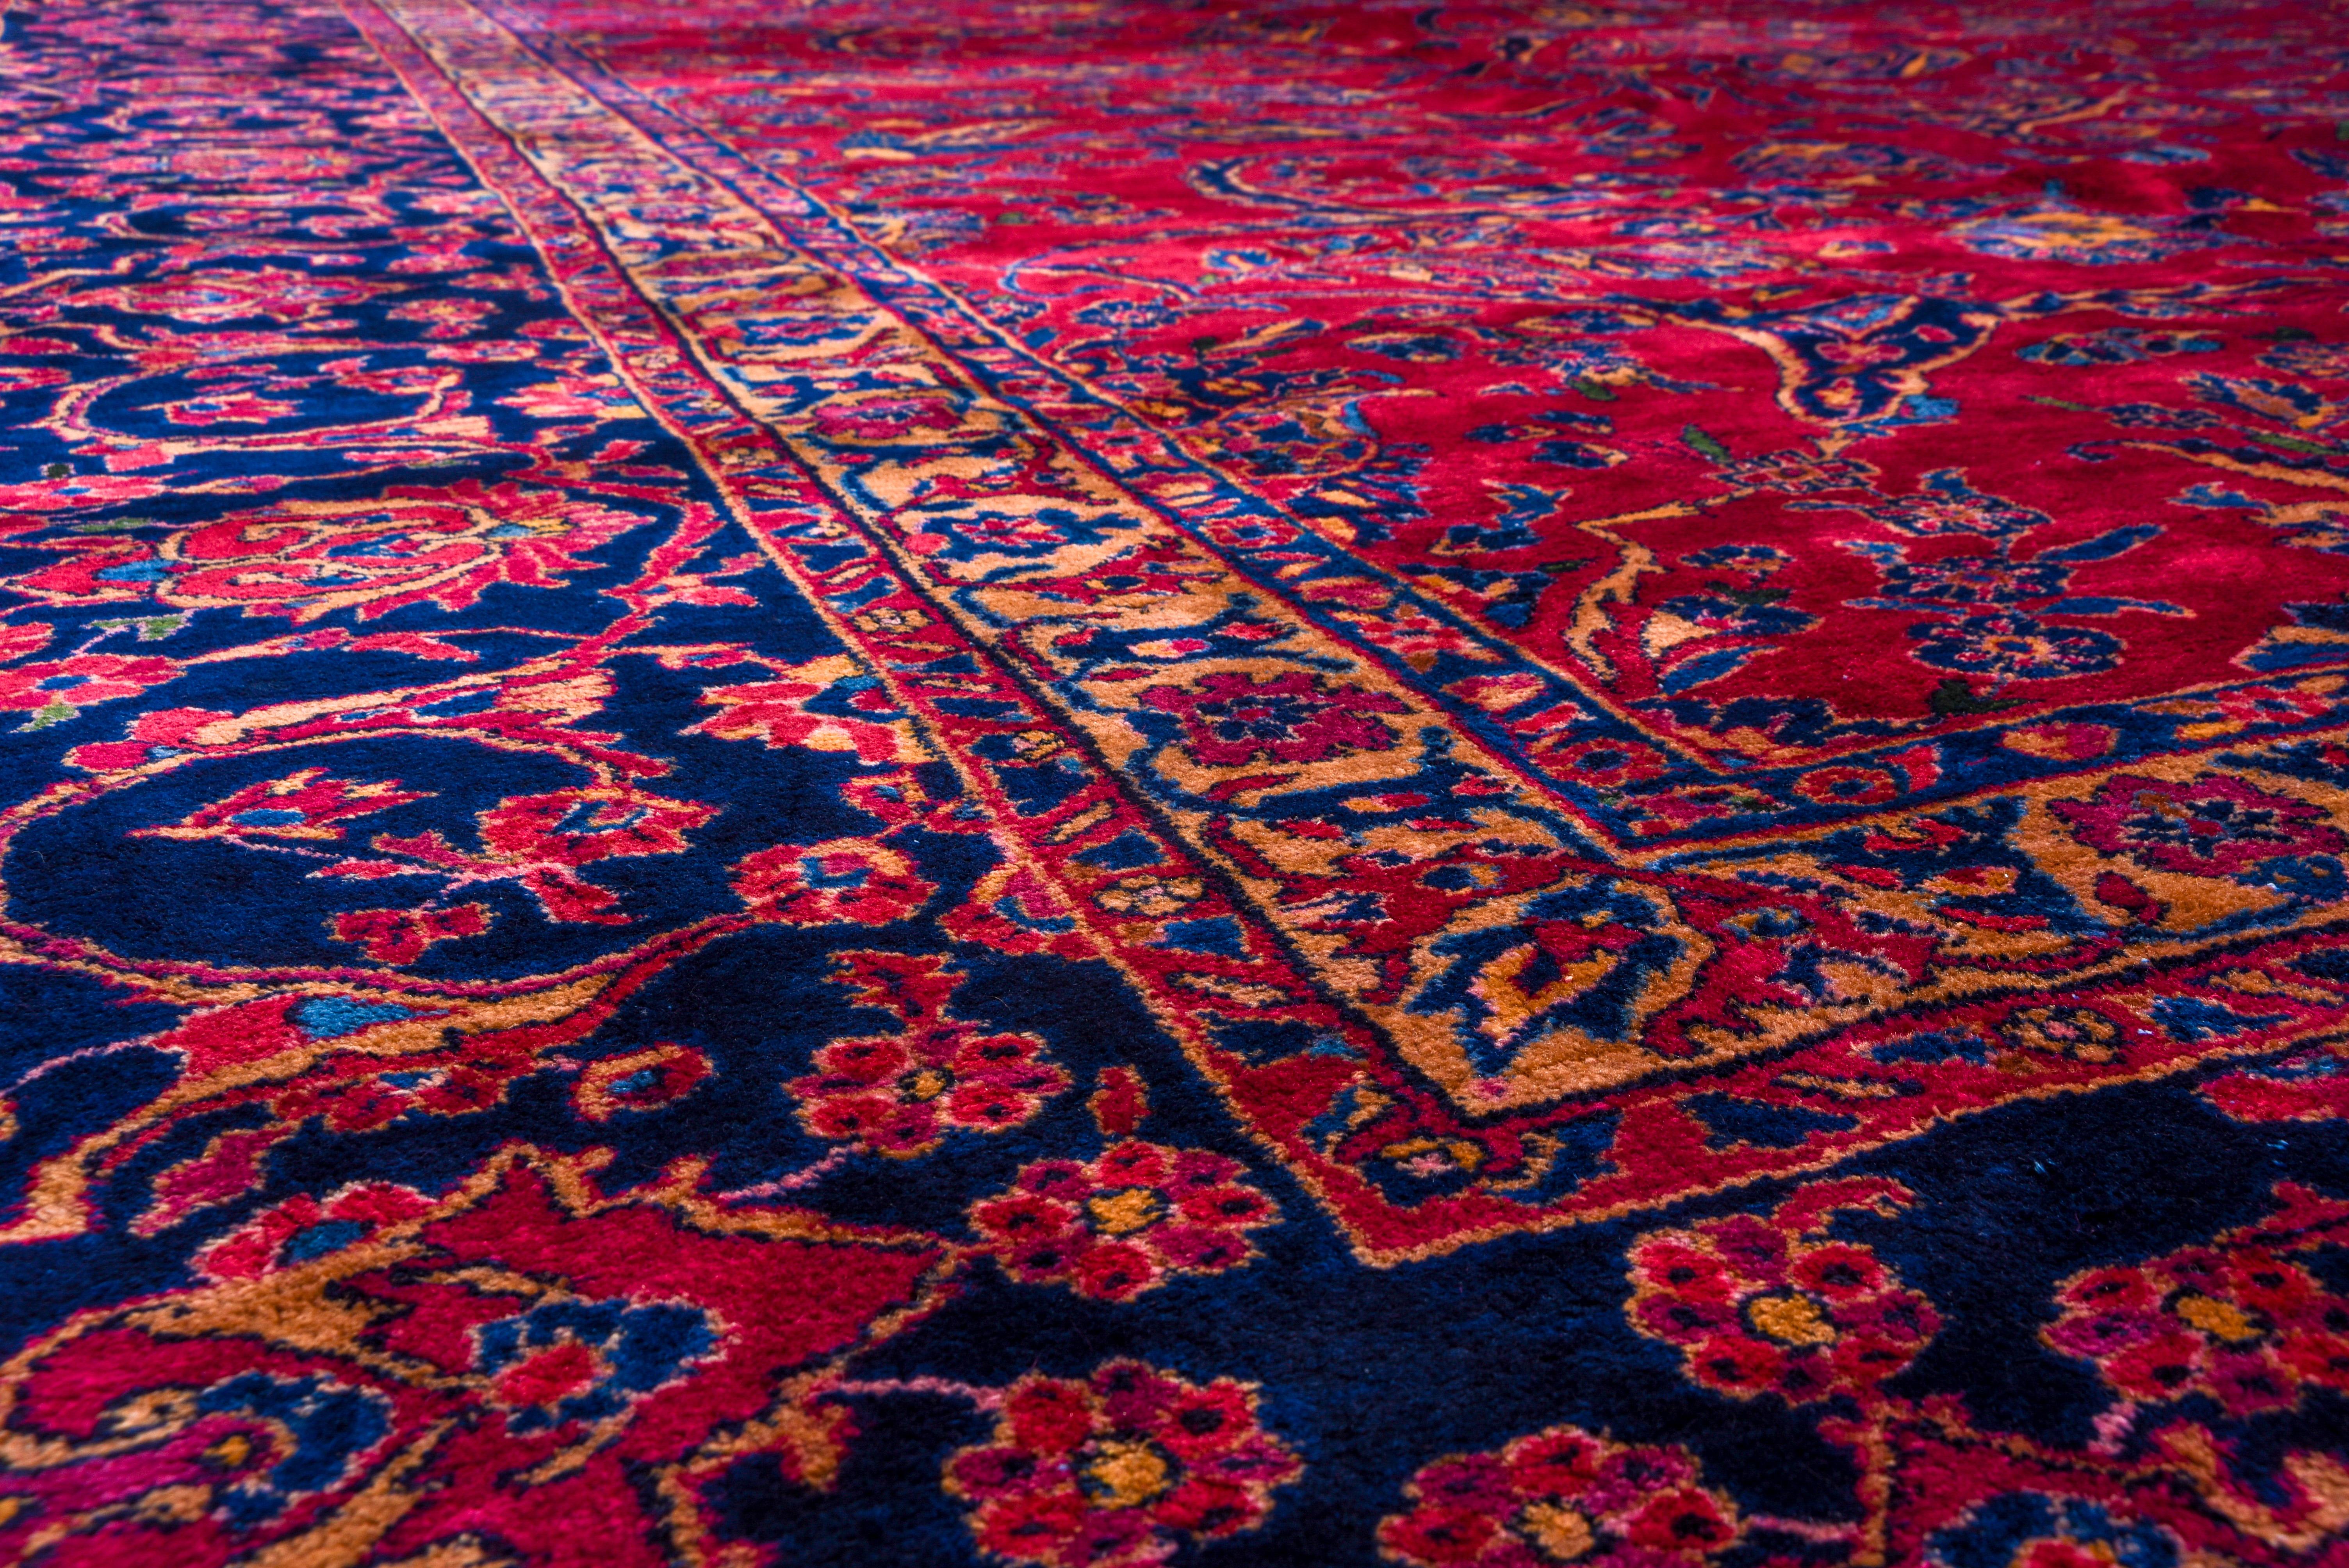 Of better Mohajeran quality, thus enormous, medium weave, cotton foundation, good condition West Persian carpet presents a Classic red field with floral sprays swirling around an open centerpiece of navy forked arabesques and radiating petal